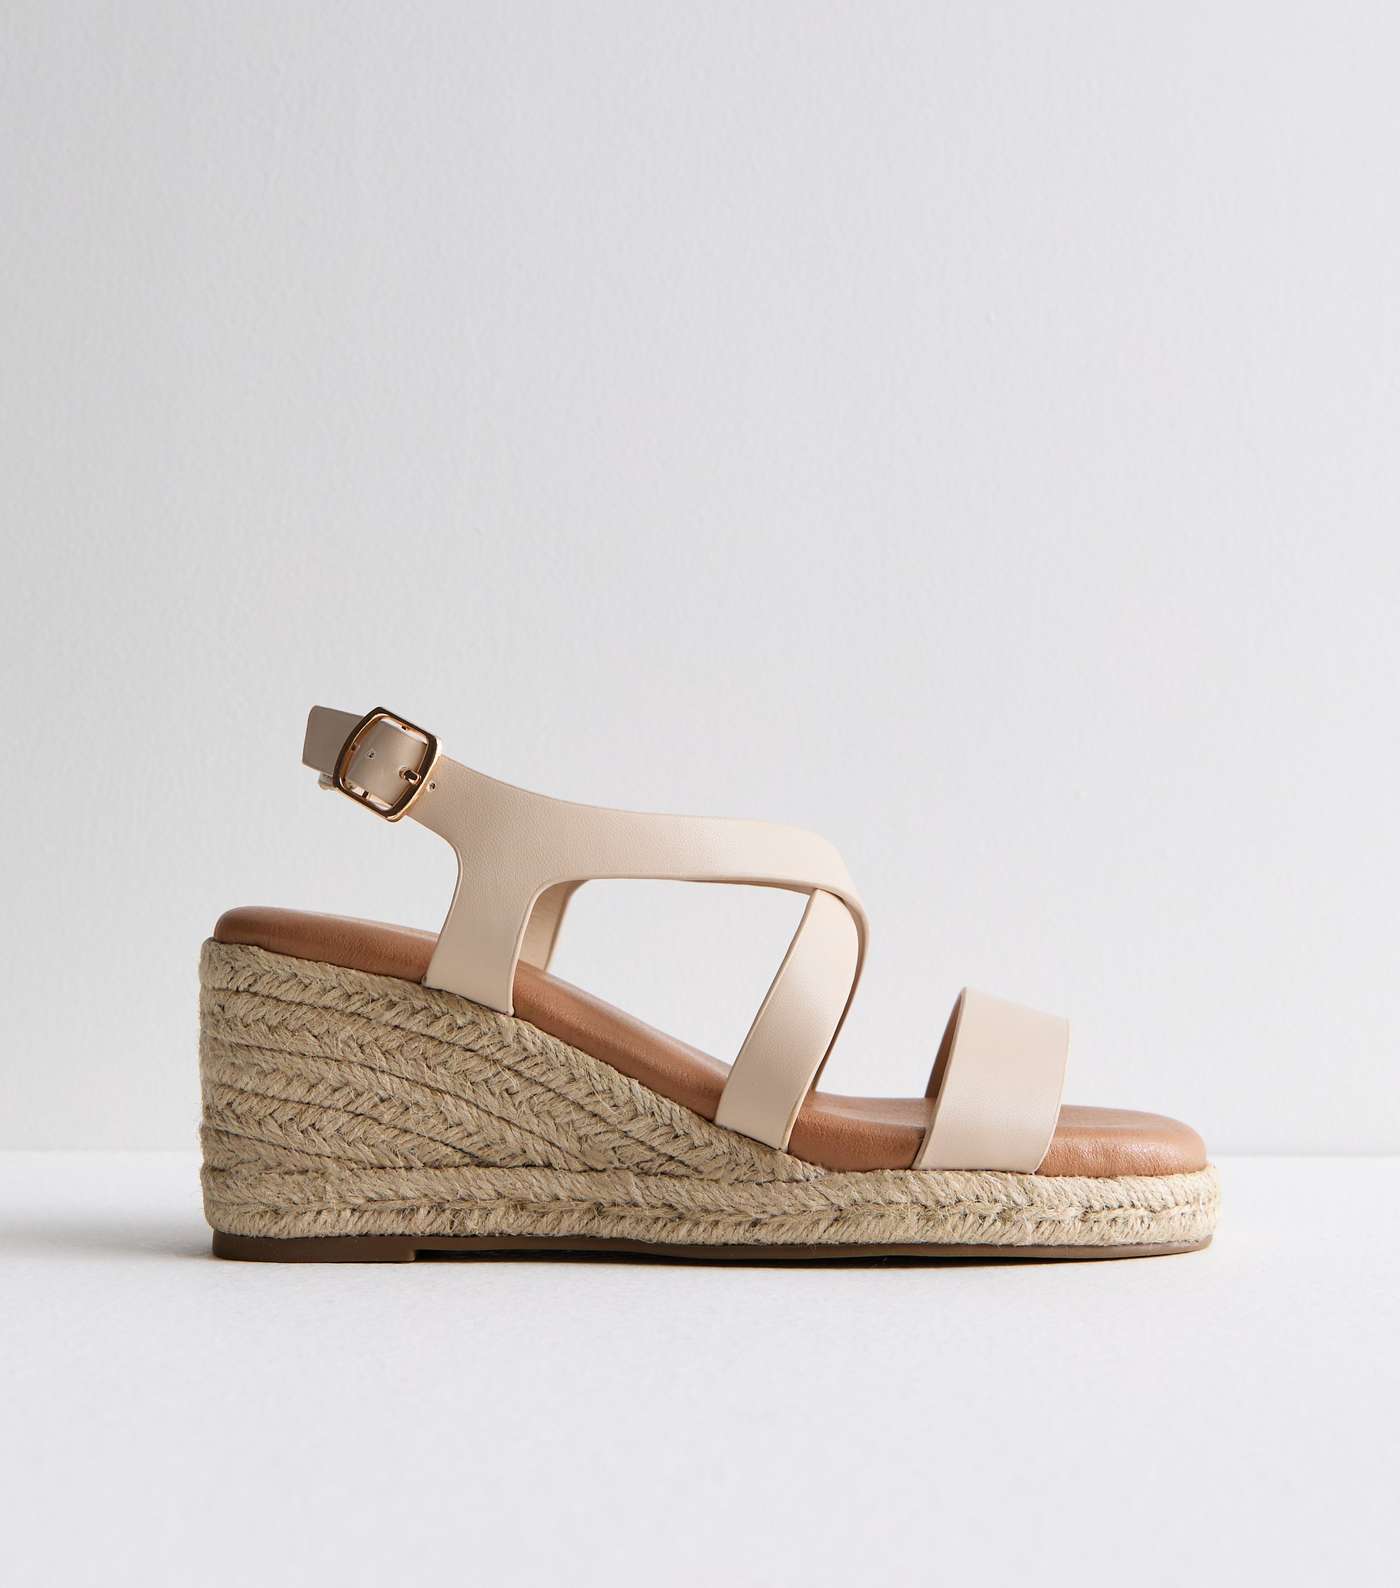 Off White Leather-Look Espadrille Wedge Heel Sandals Image 5